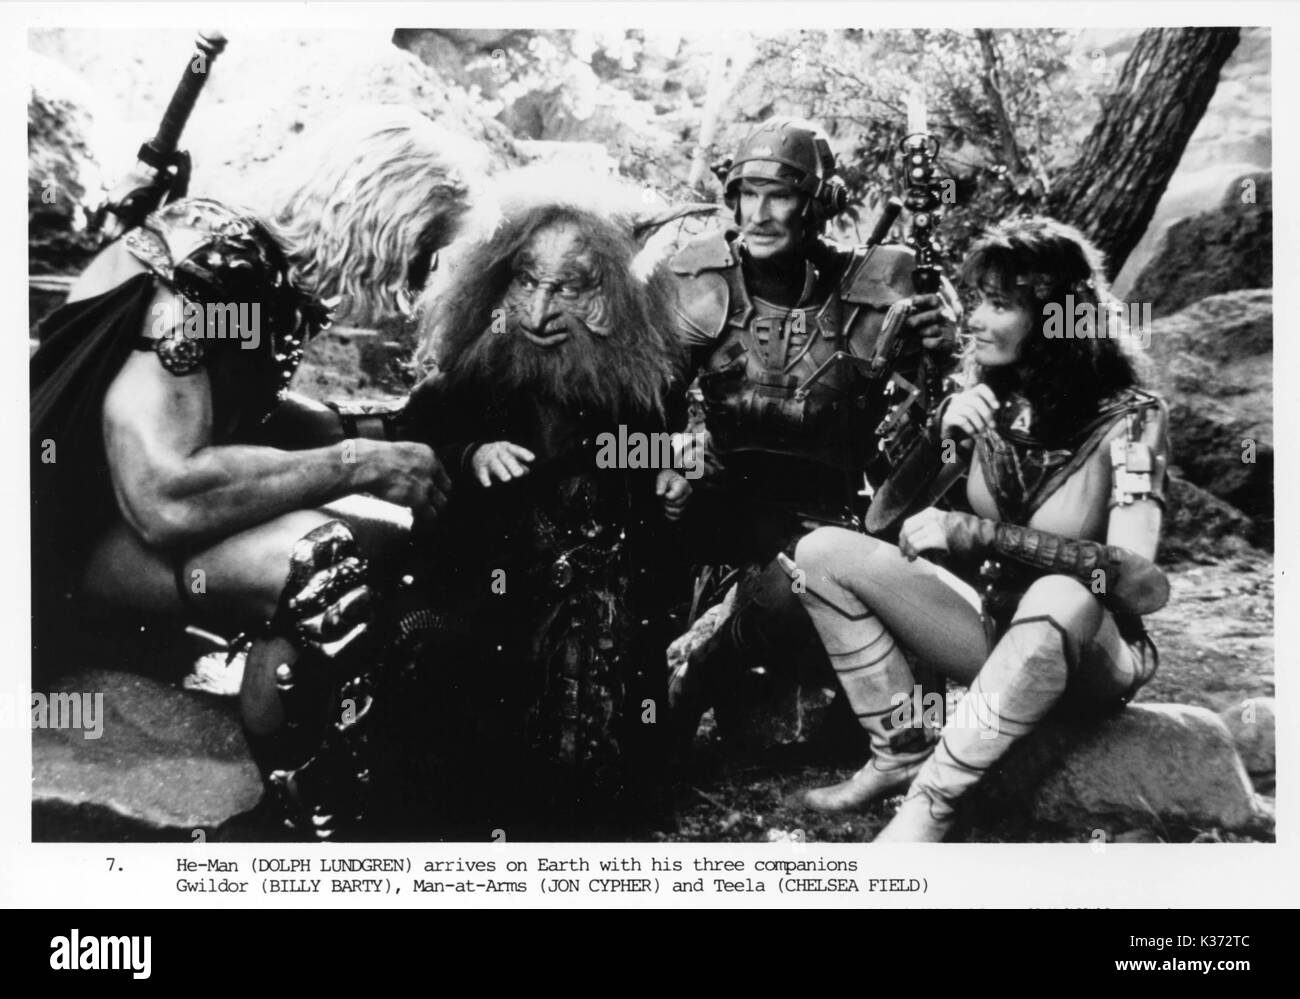 MASTERS OF THE UNIVERSE (US 1987) CANNON FILMS'GOLAN-GLOBUS DOLPH LUNDGREN, BILLY BARTY, JON CYPHER, CHELSEA FIELD   MASTERS OF THE UNIVERSE (US 1987) CANNON FILMS'GOLAN-GLOBUS DOLPH LUNDGREN, BILLY BARTY, JON CYPHER, CHELSEA FIELD Stock Photo